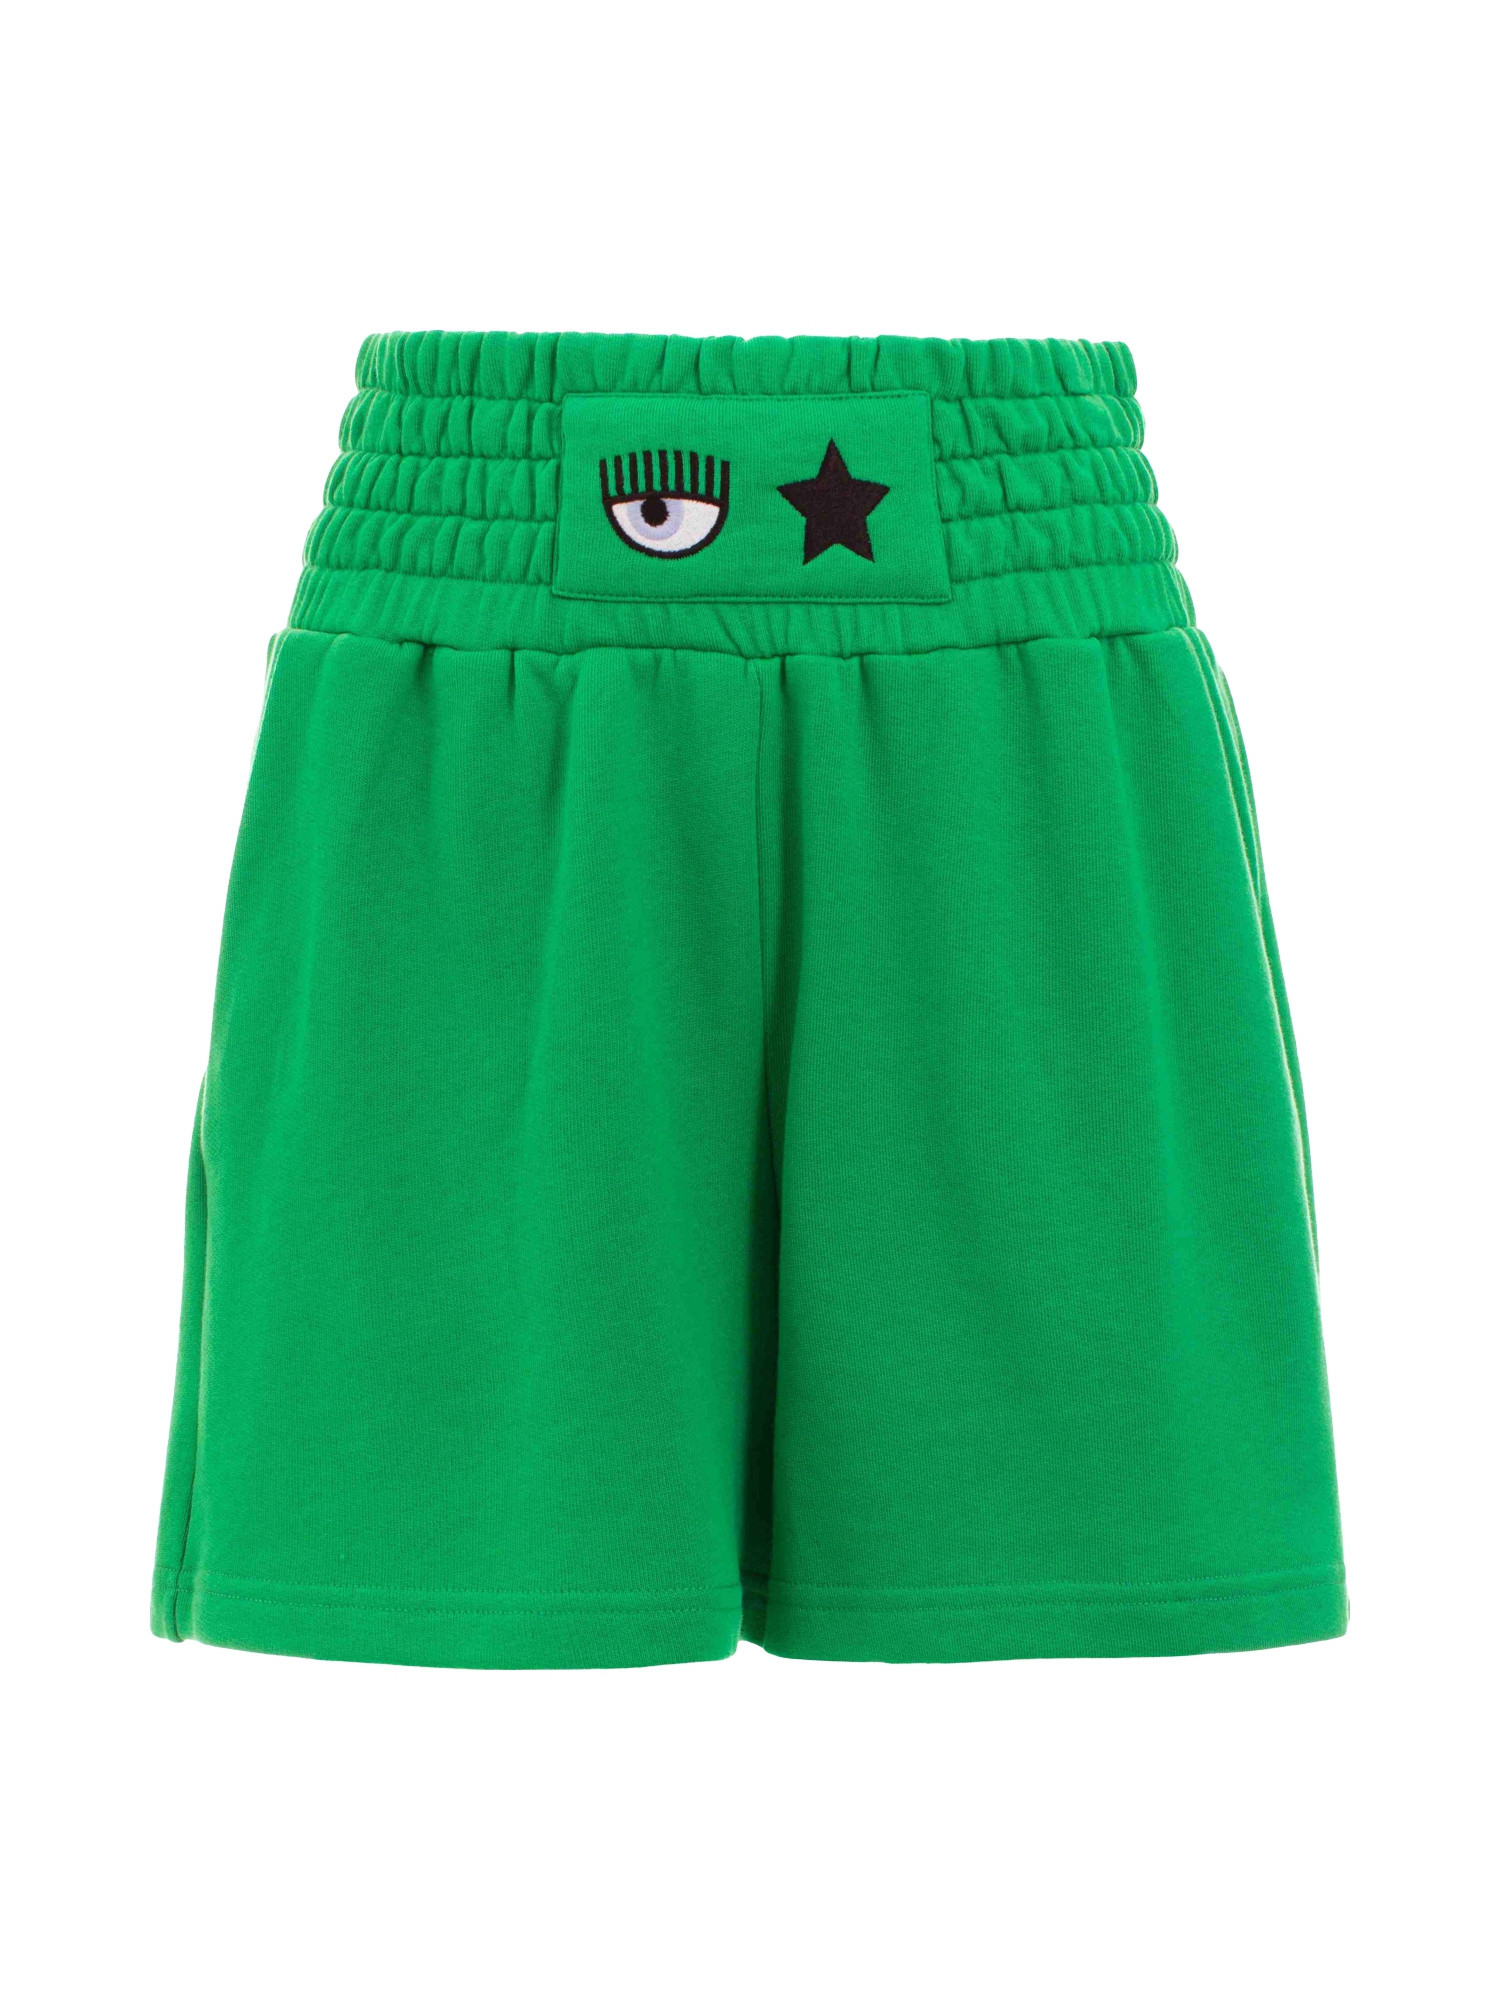 Chiara Ferragni - Shorts with elastic waistband and Eye Star embroidery, Green, large image number 0